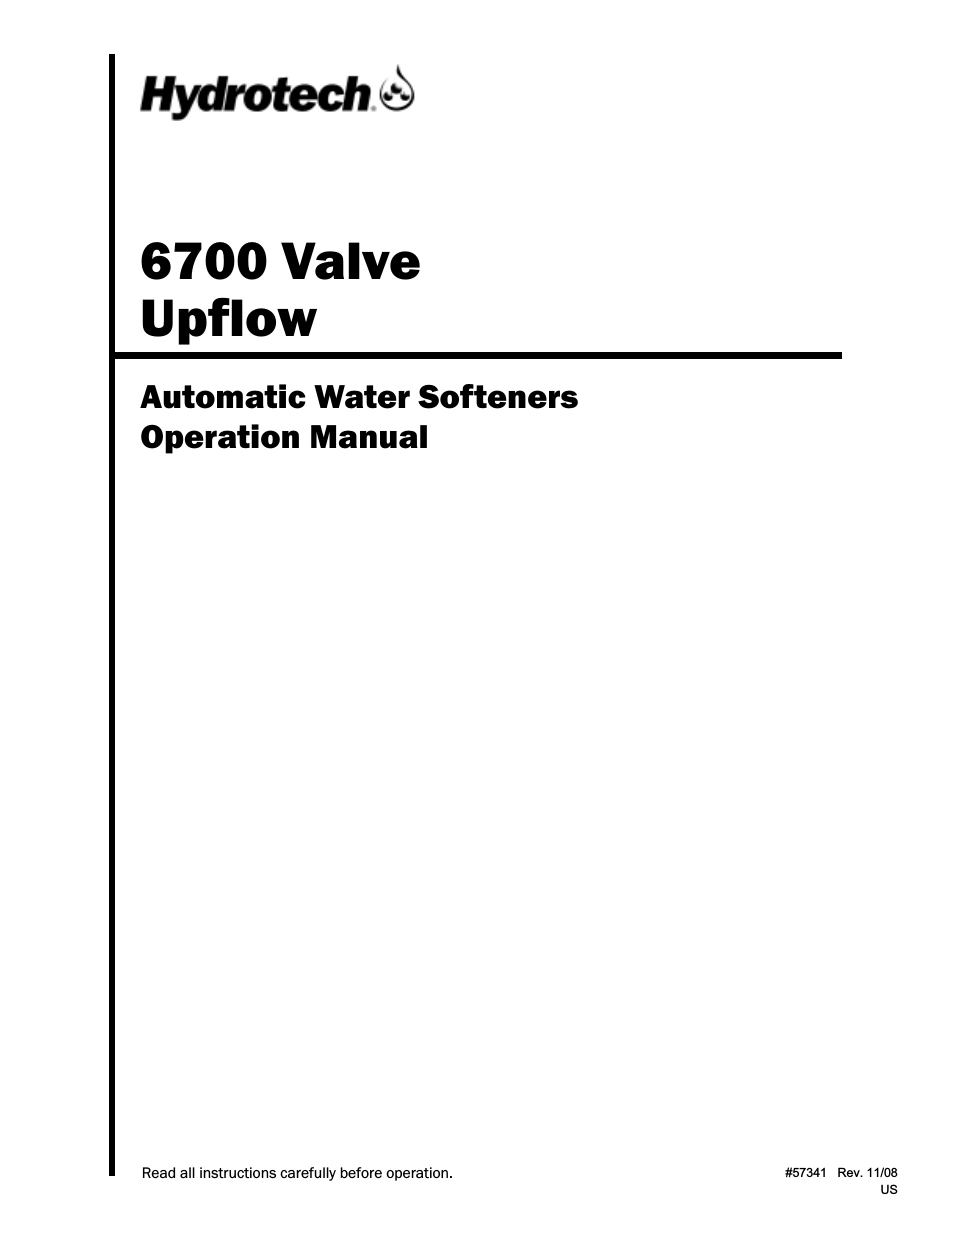 6700 Valve Upflow Automatic Water Softeners Operation Manual